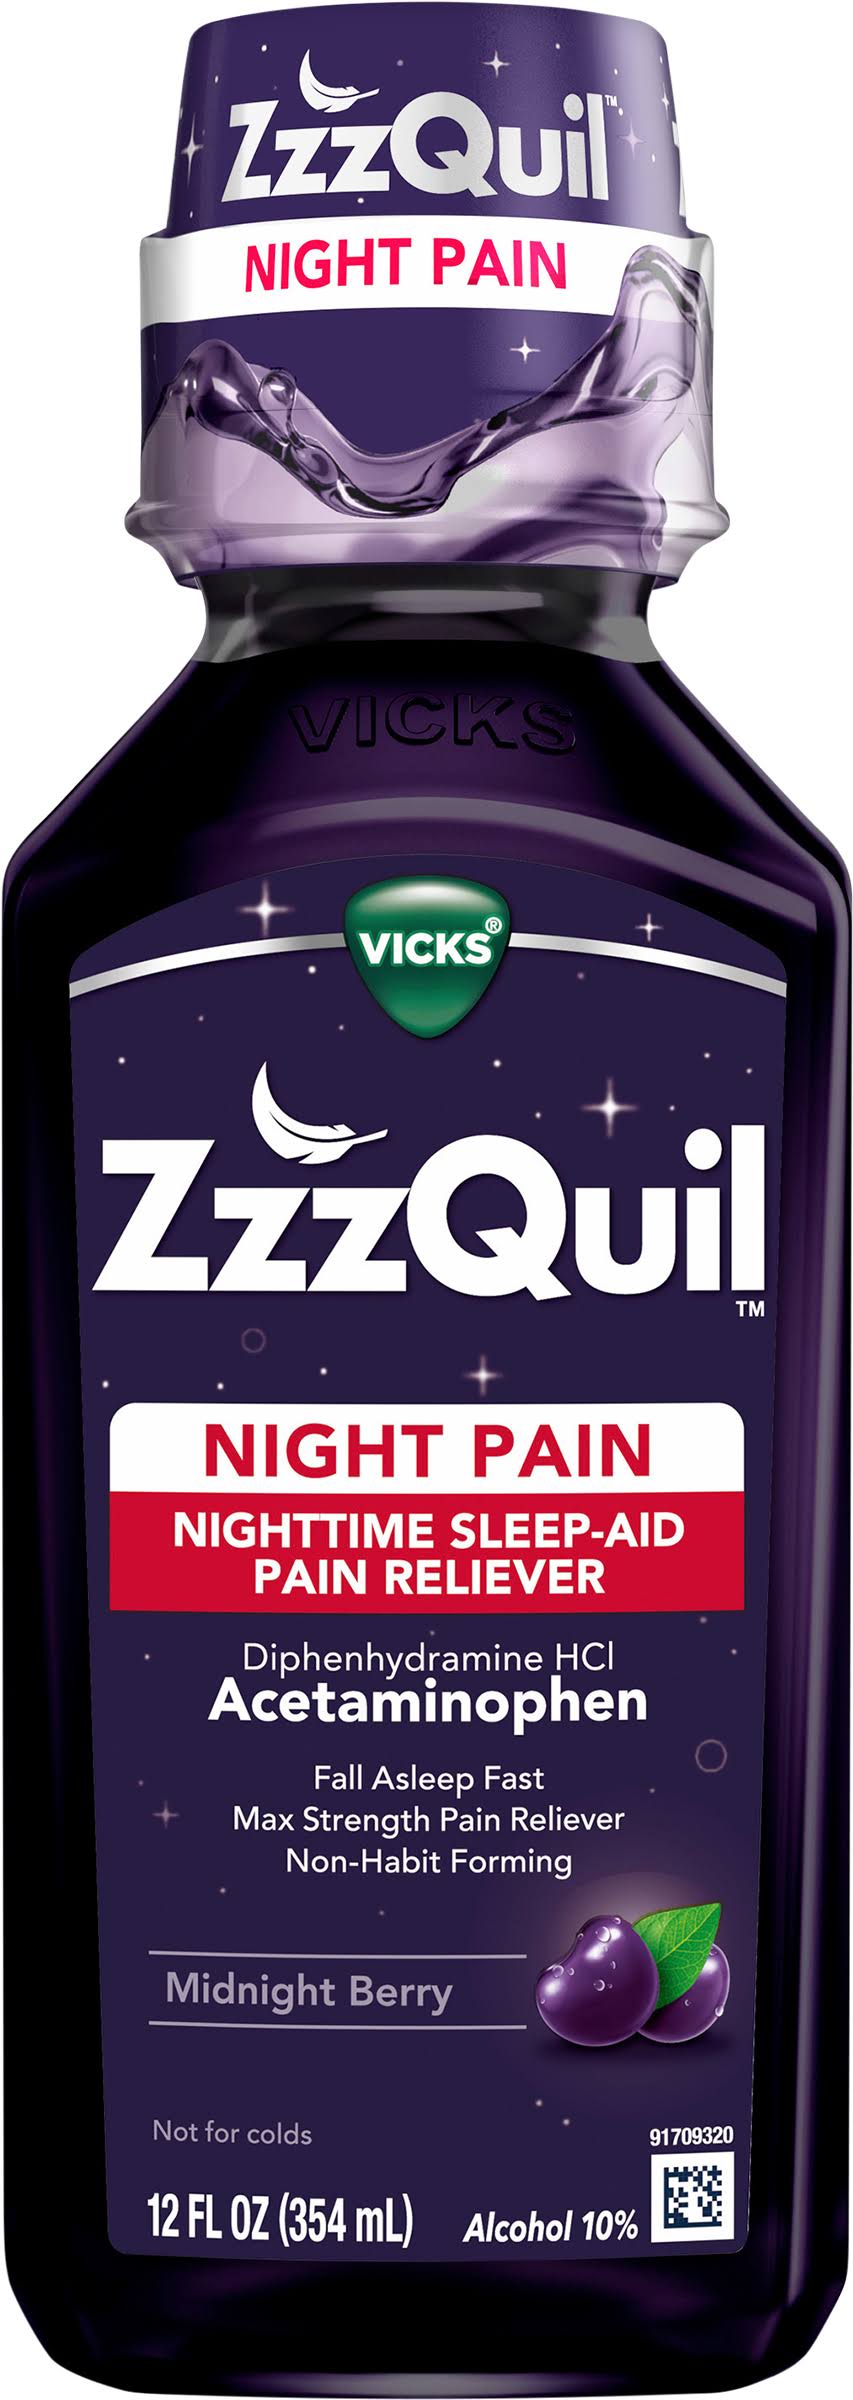 Vicks ZzzQuil Nighttime Sleep-Aid Pain Reliever, Night Pain, Midnight Berry - 12 fl oz